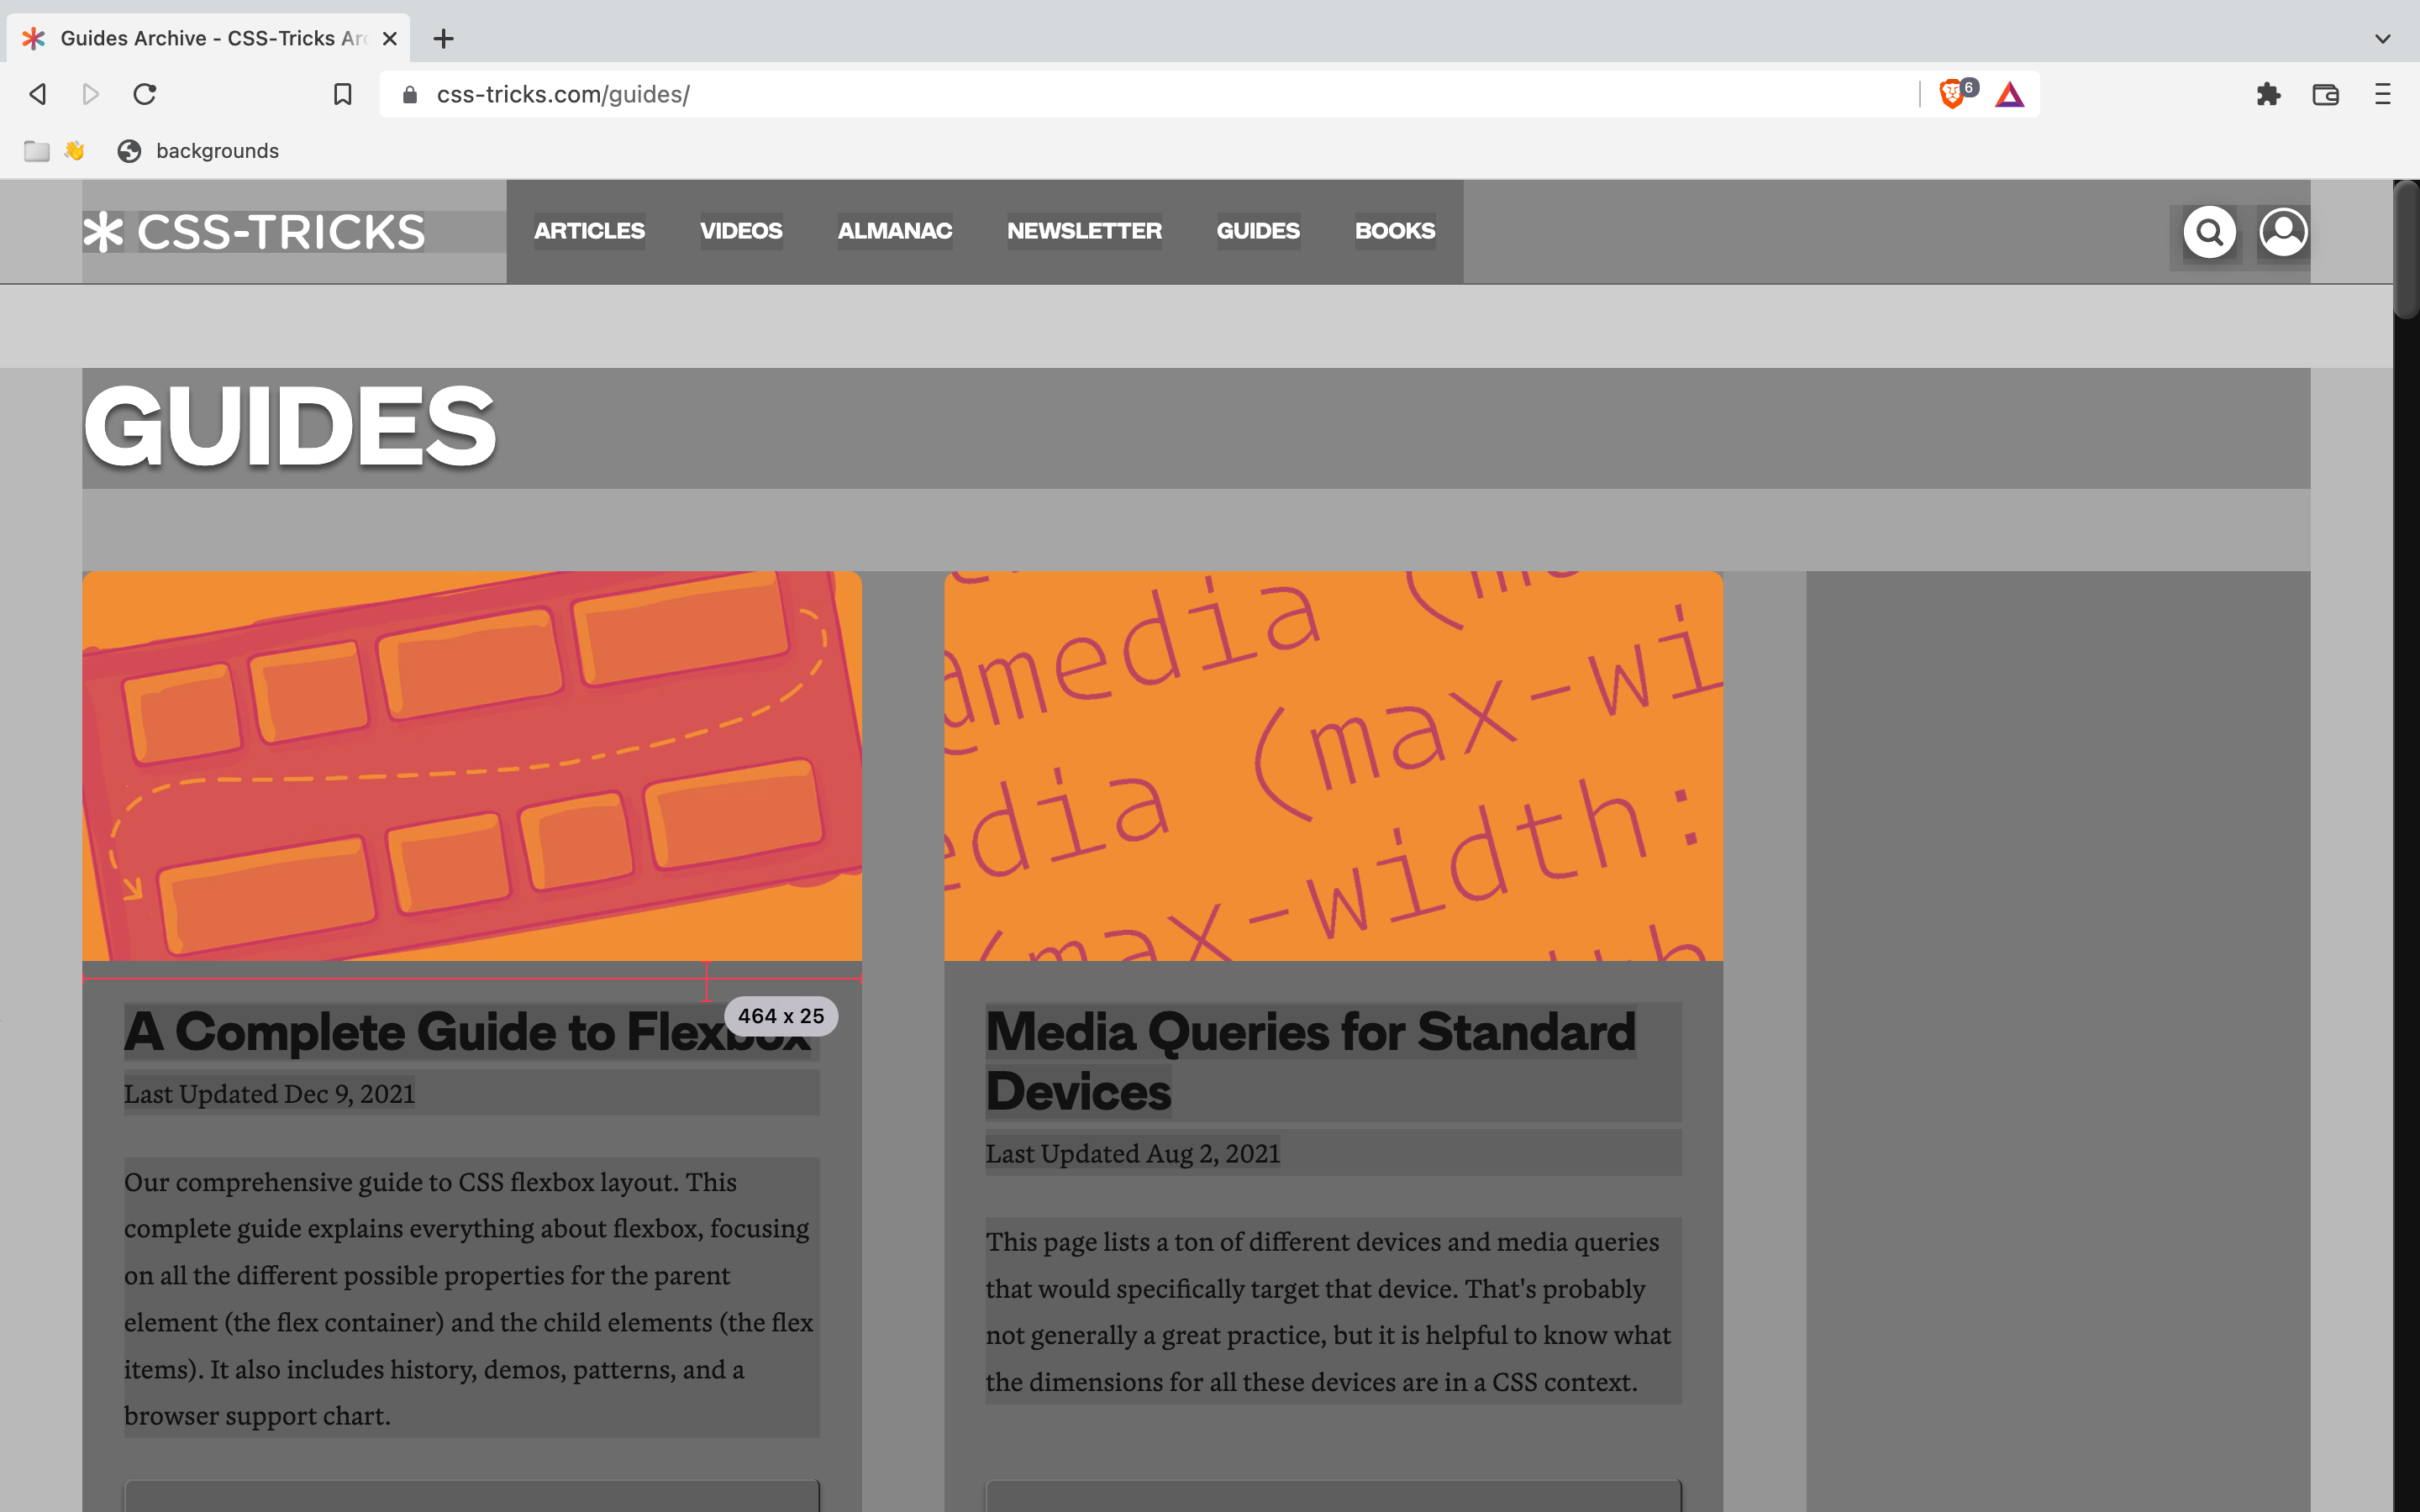 Showing the CSS-Tricks guides landing page with all backgrounds fill with varying shades of gray.